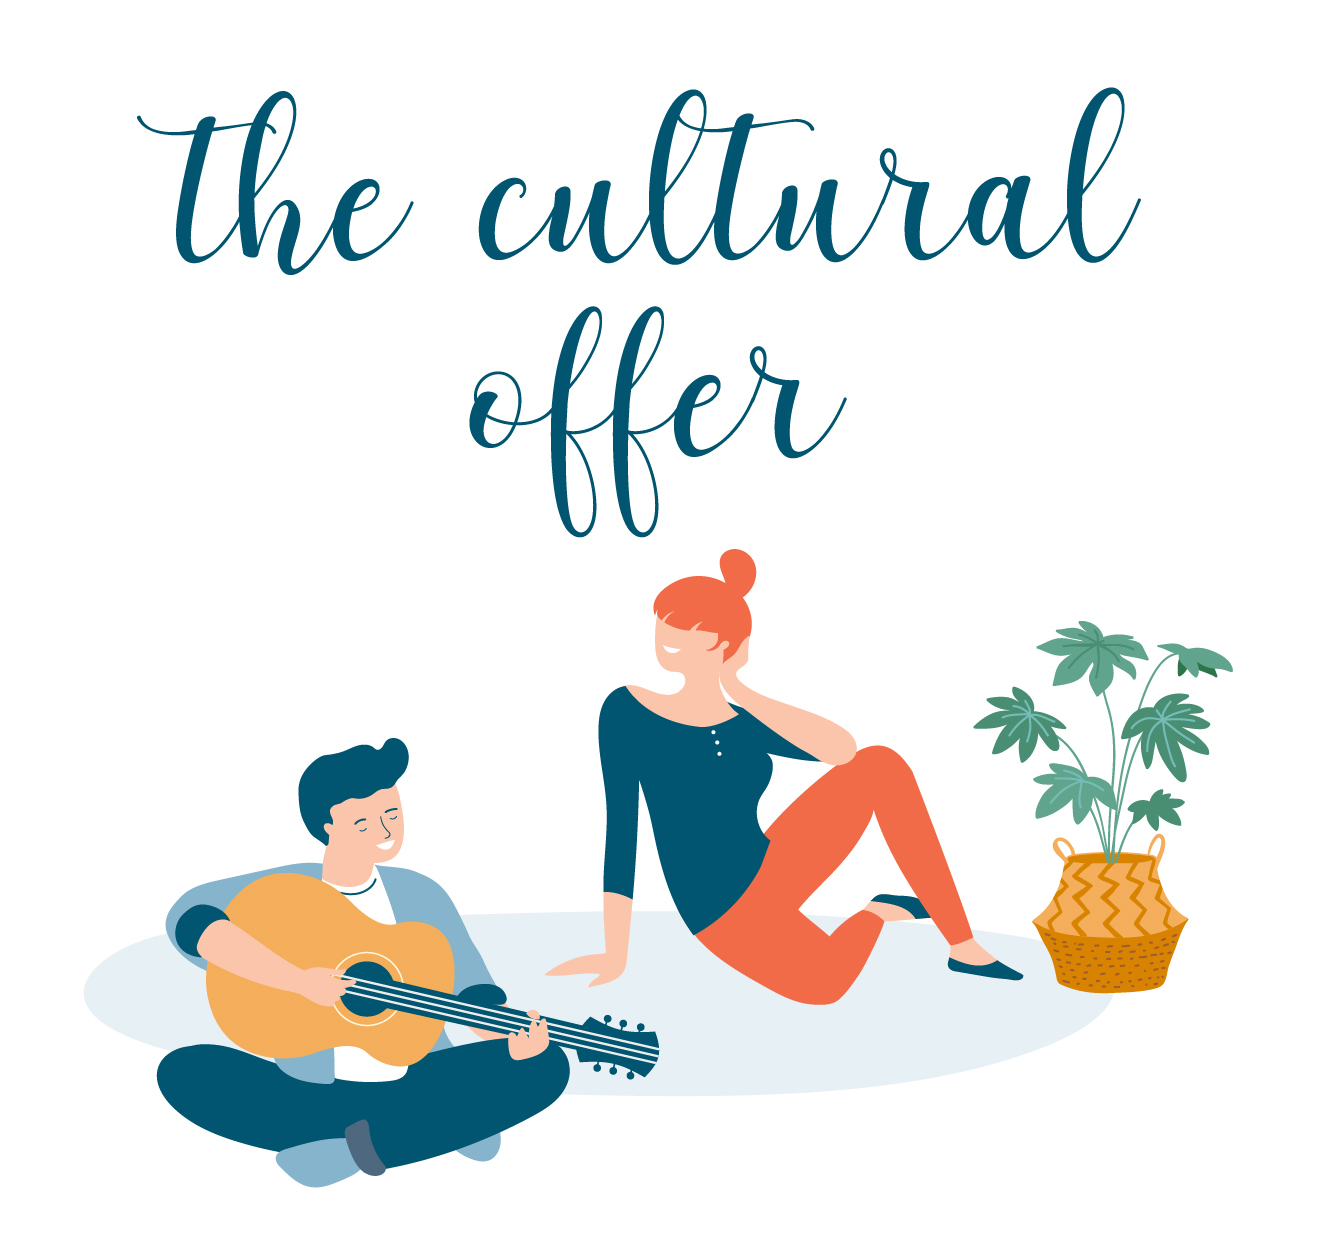 The cultural offer